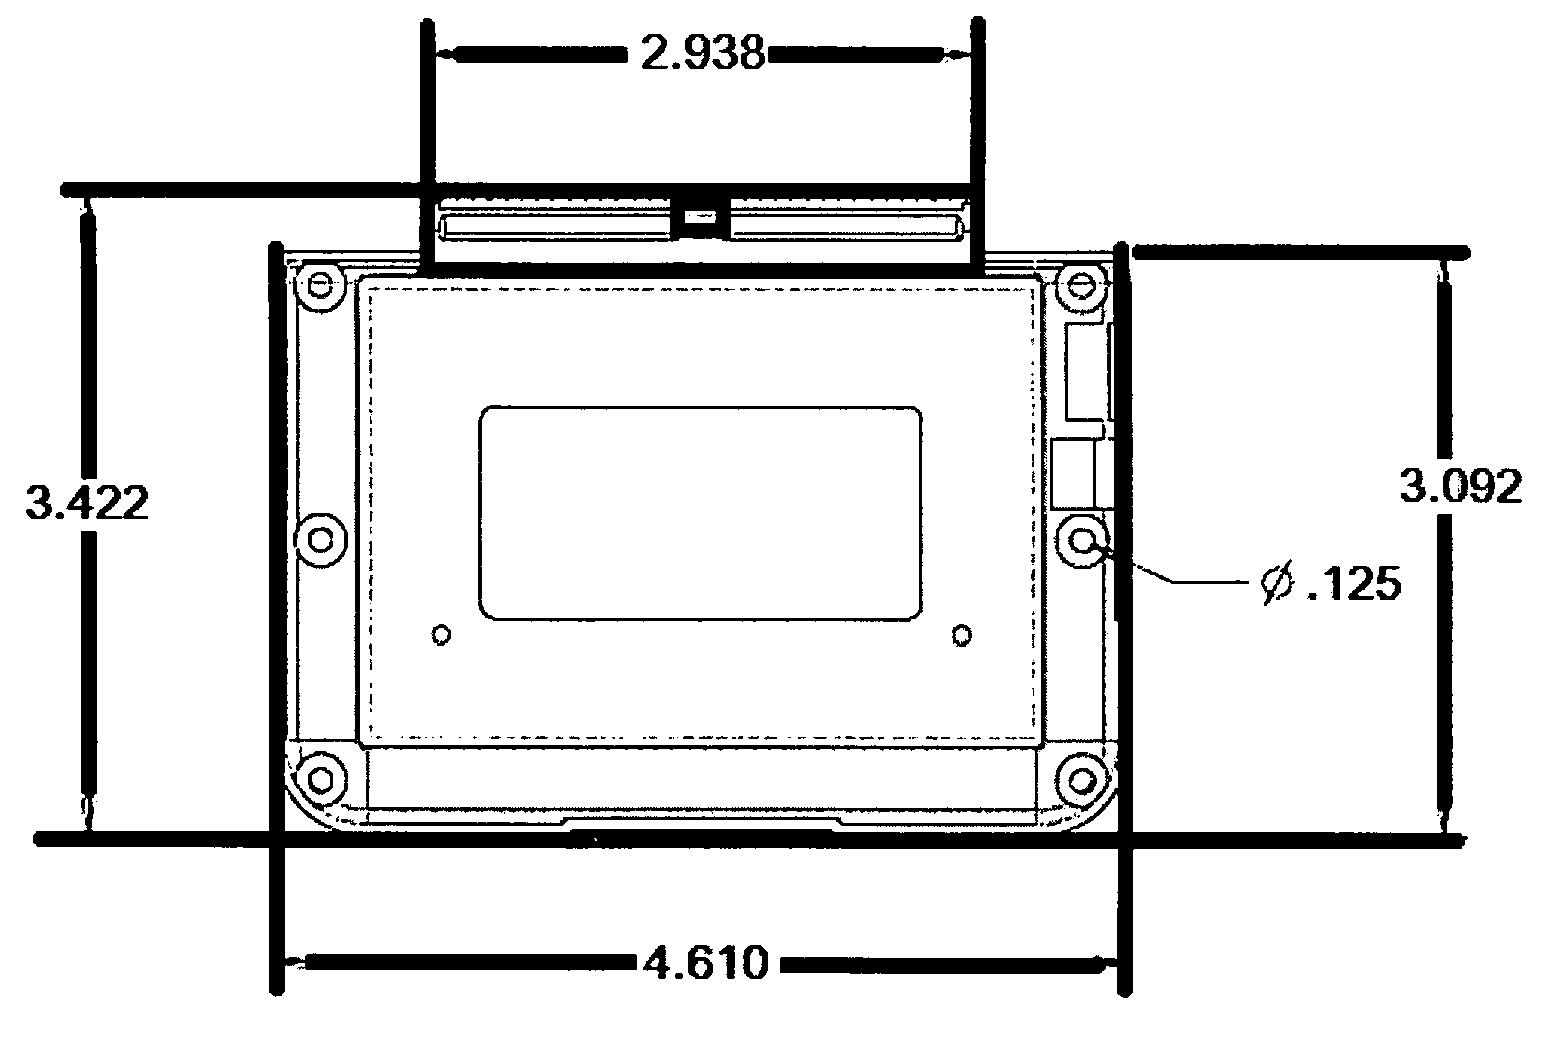 Self-powered solar illumination device with self-contained power system